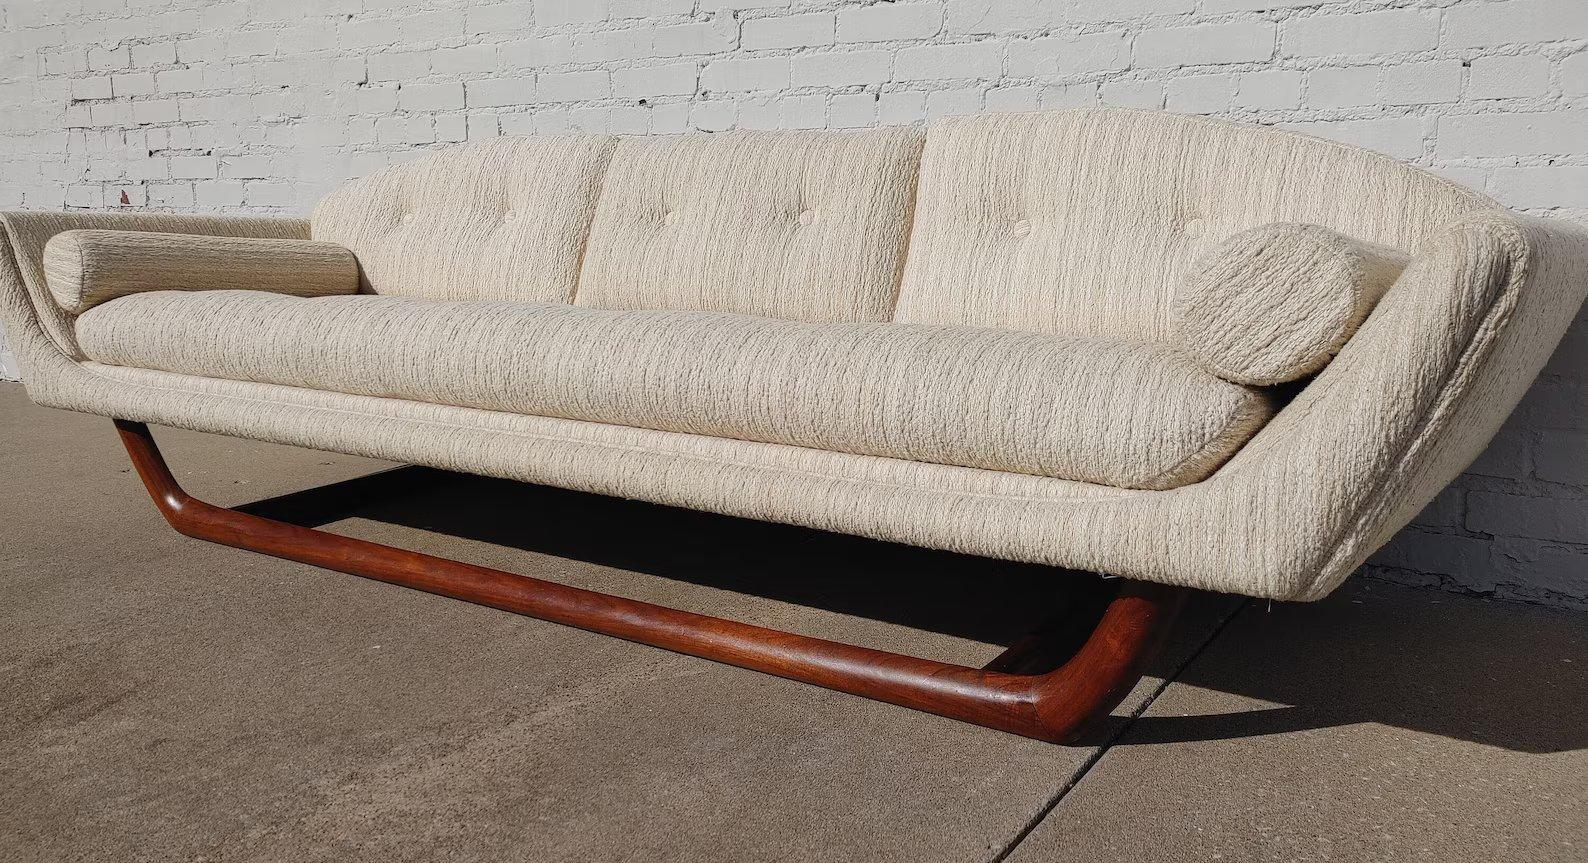 Mid Century Modern Gondola Sofa In Manner of Adrian Pearsall

Above average vintage condition and structurally sound. Has some expected slight finish wear on the trim and little if any soiling on the armrests. Has two dime size discolorations on the